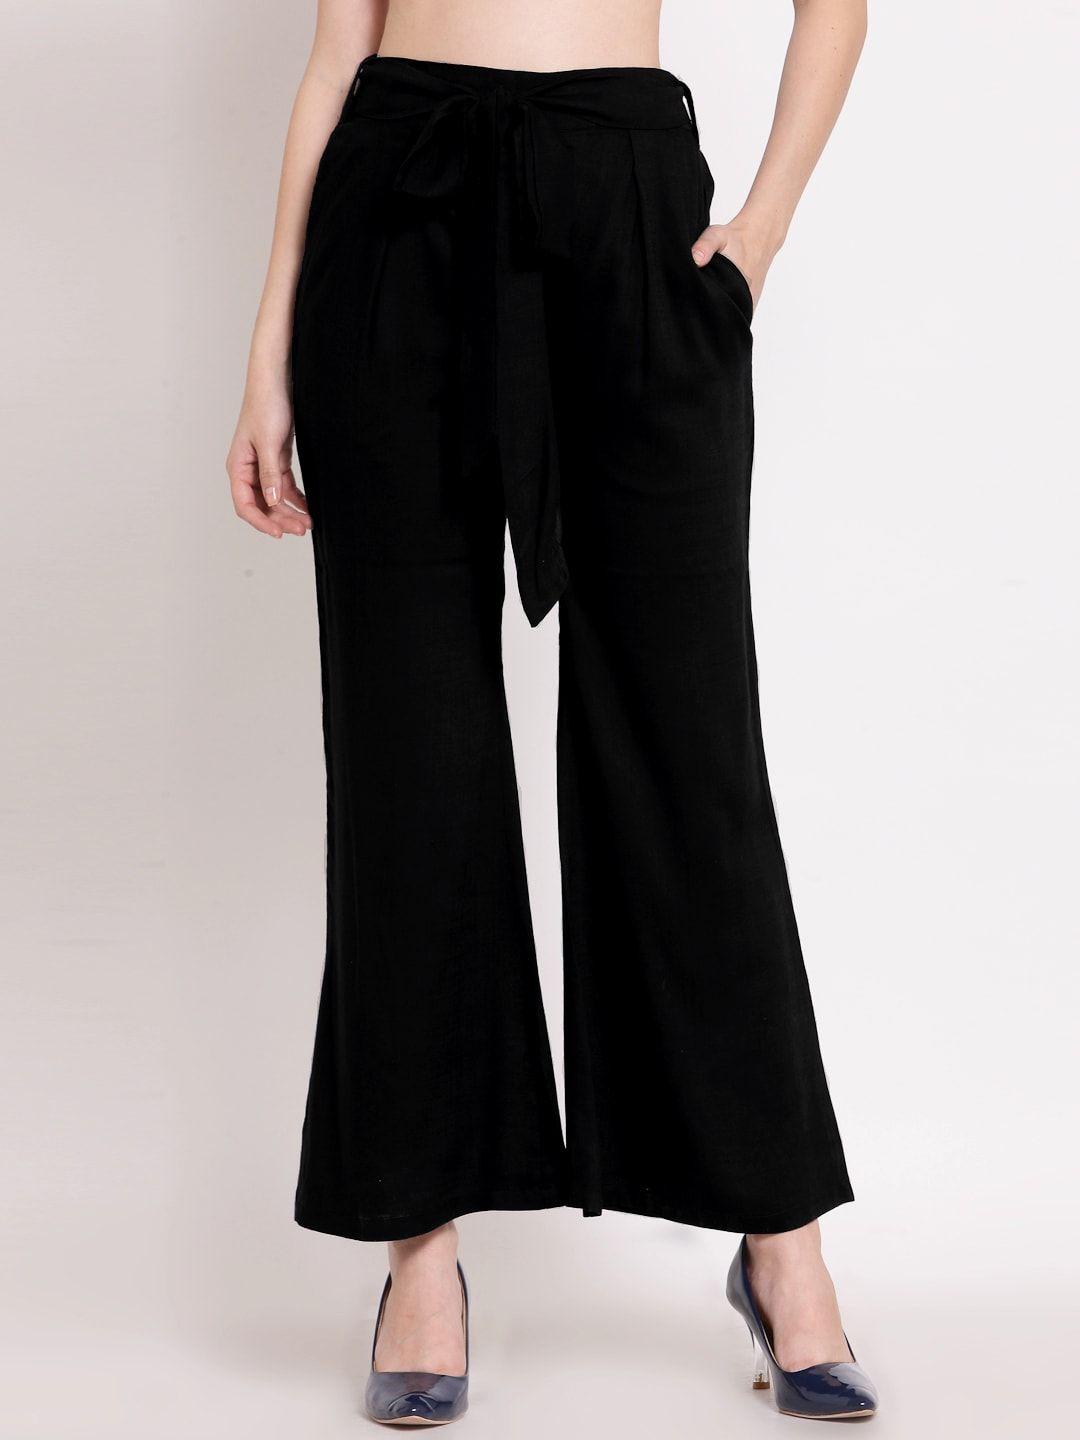 patrorna women smart tapered fit pleated parallel trousers